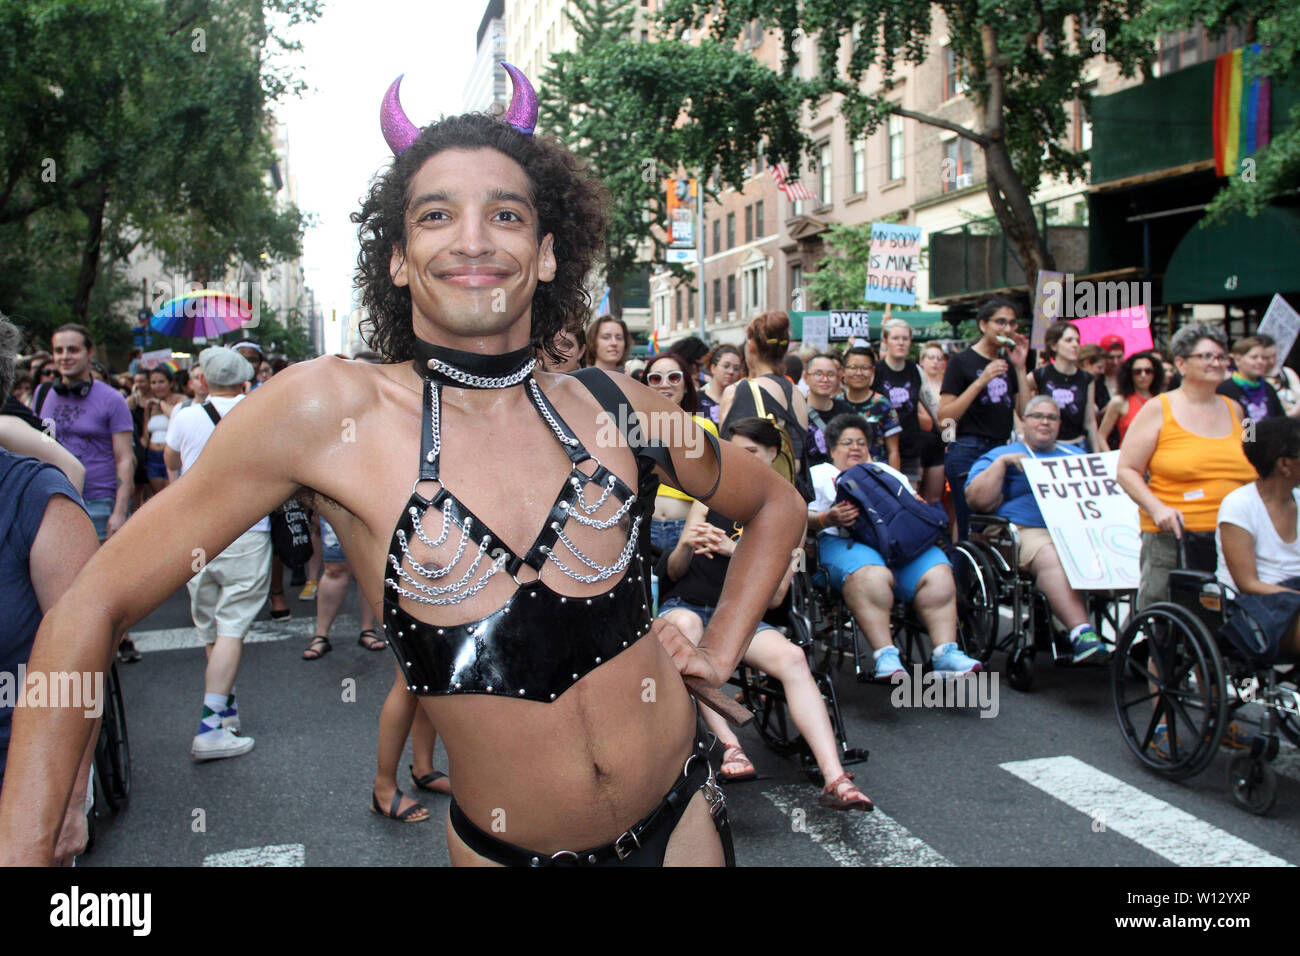 June 29, 2019 - New York, New York, U.S. - Dyke March started in N.Y.C's Bryant Park  they marched down 5th ave to Washington Square Park where some marchers jumped into the fountain singing '' When the Dykes Keep Marching in' (Credit Image: © Bruce Cotler/Globe Photos via ZUMA Wire) Stock Photo